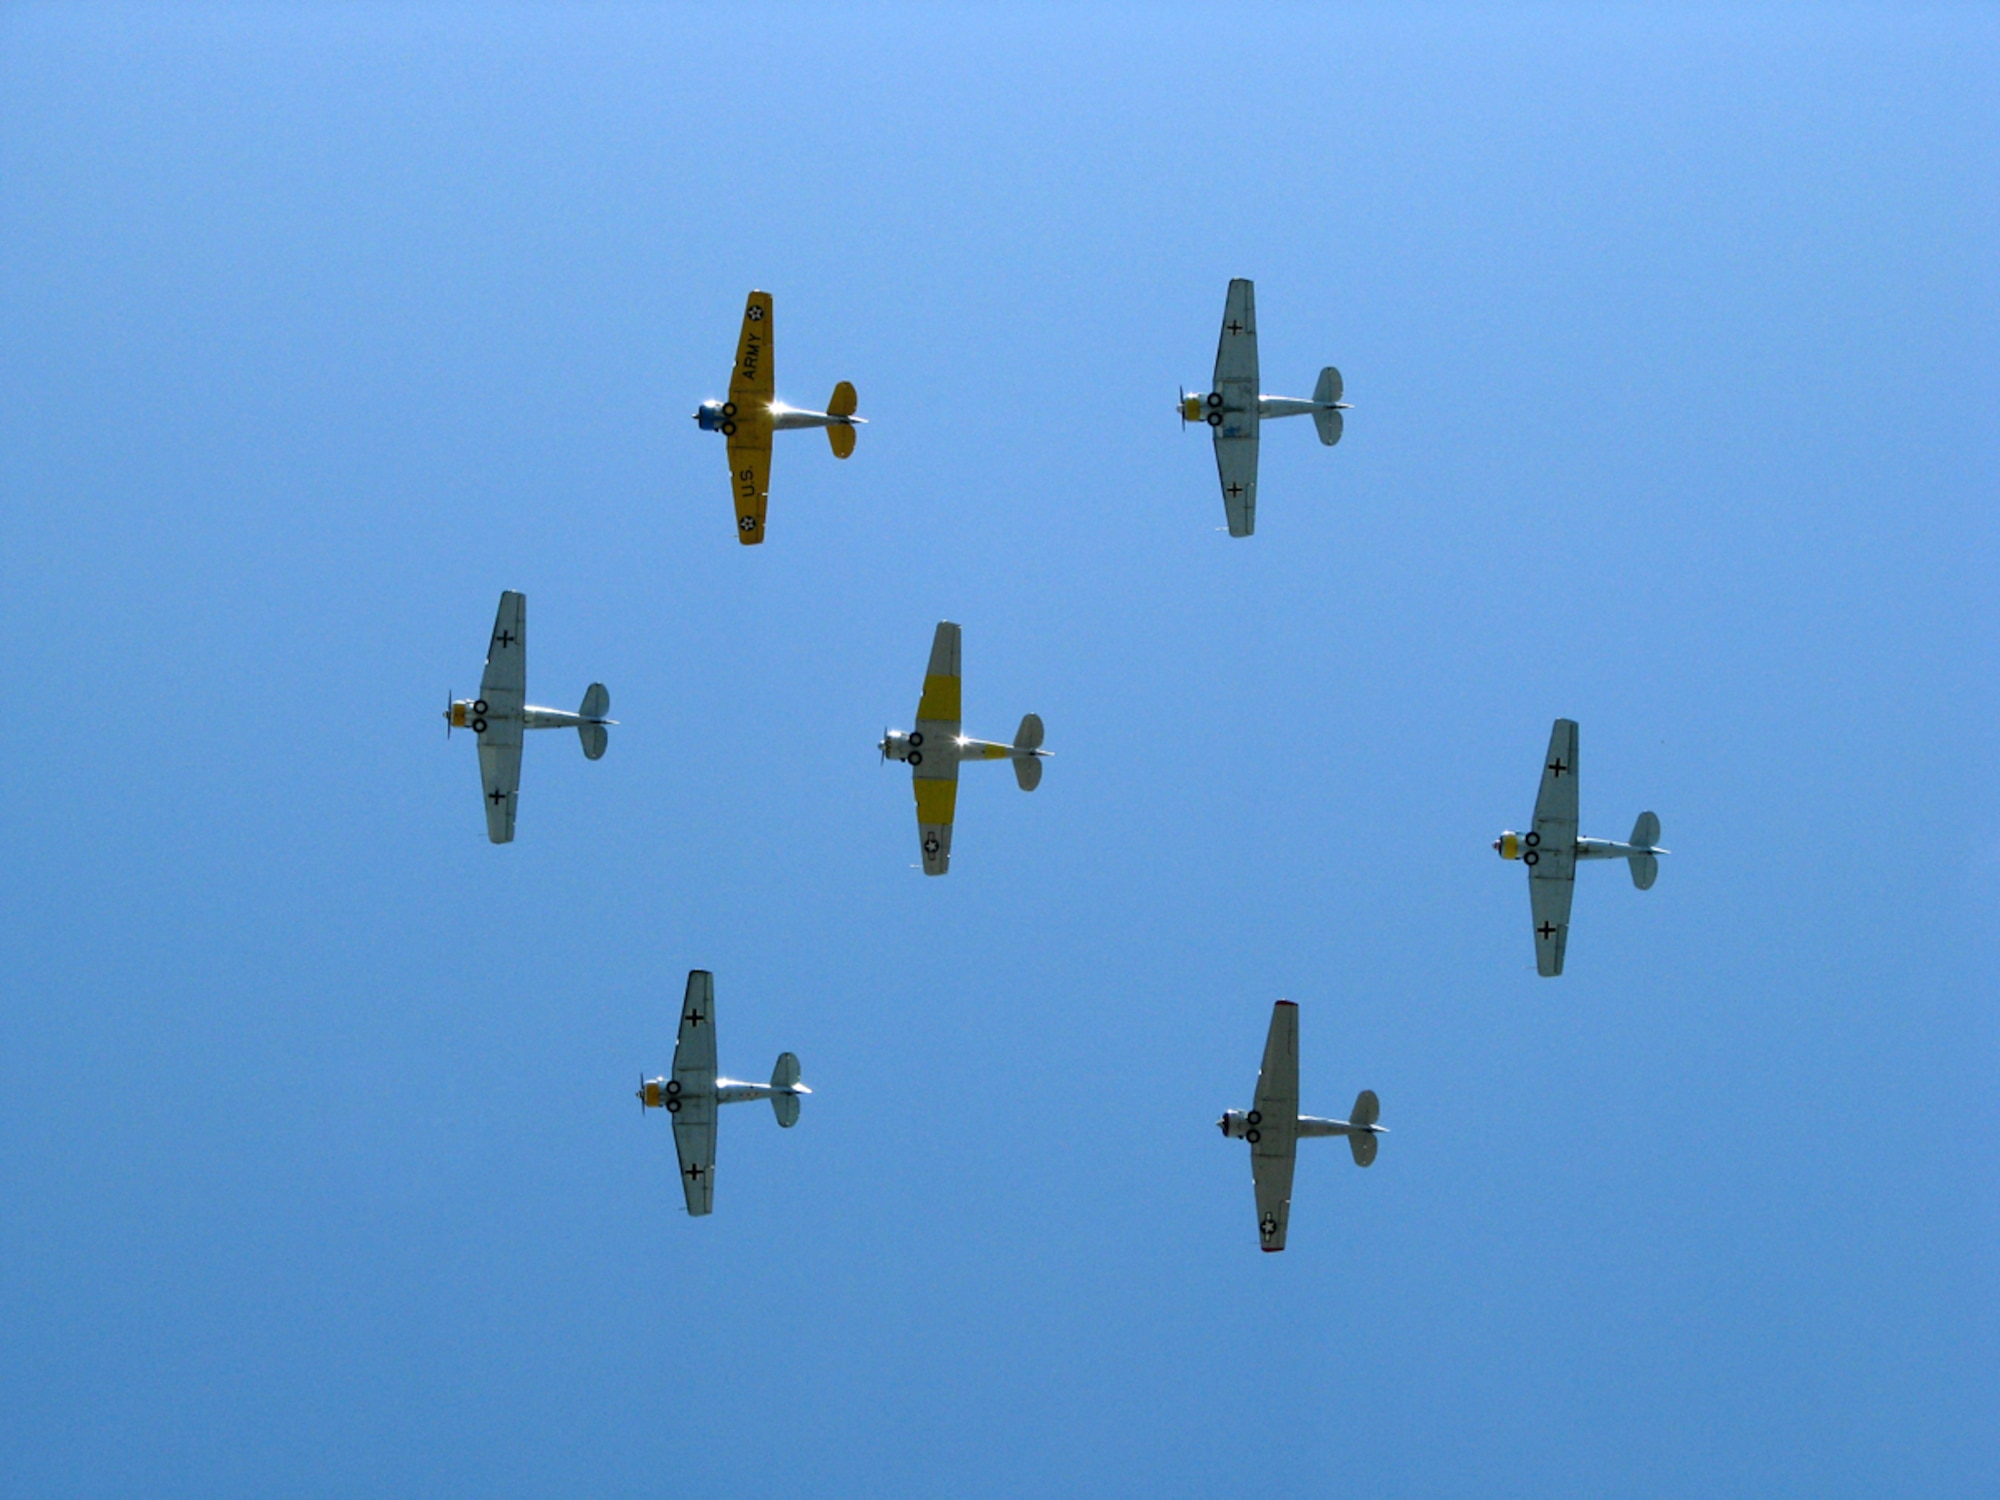 Vintage military planes fly over Santa Monica during the city’s Memorial Day observance, May 26. (Photo by Joe Juarez)